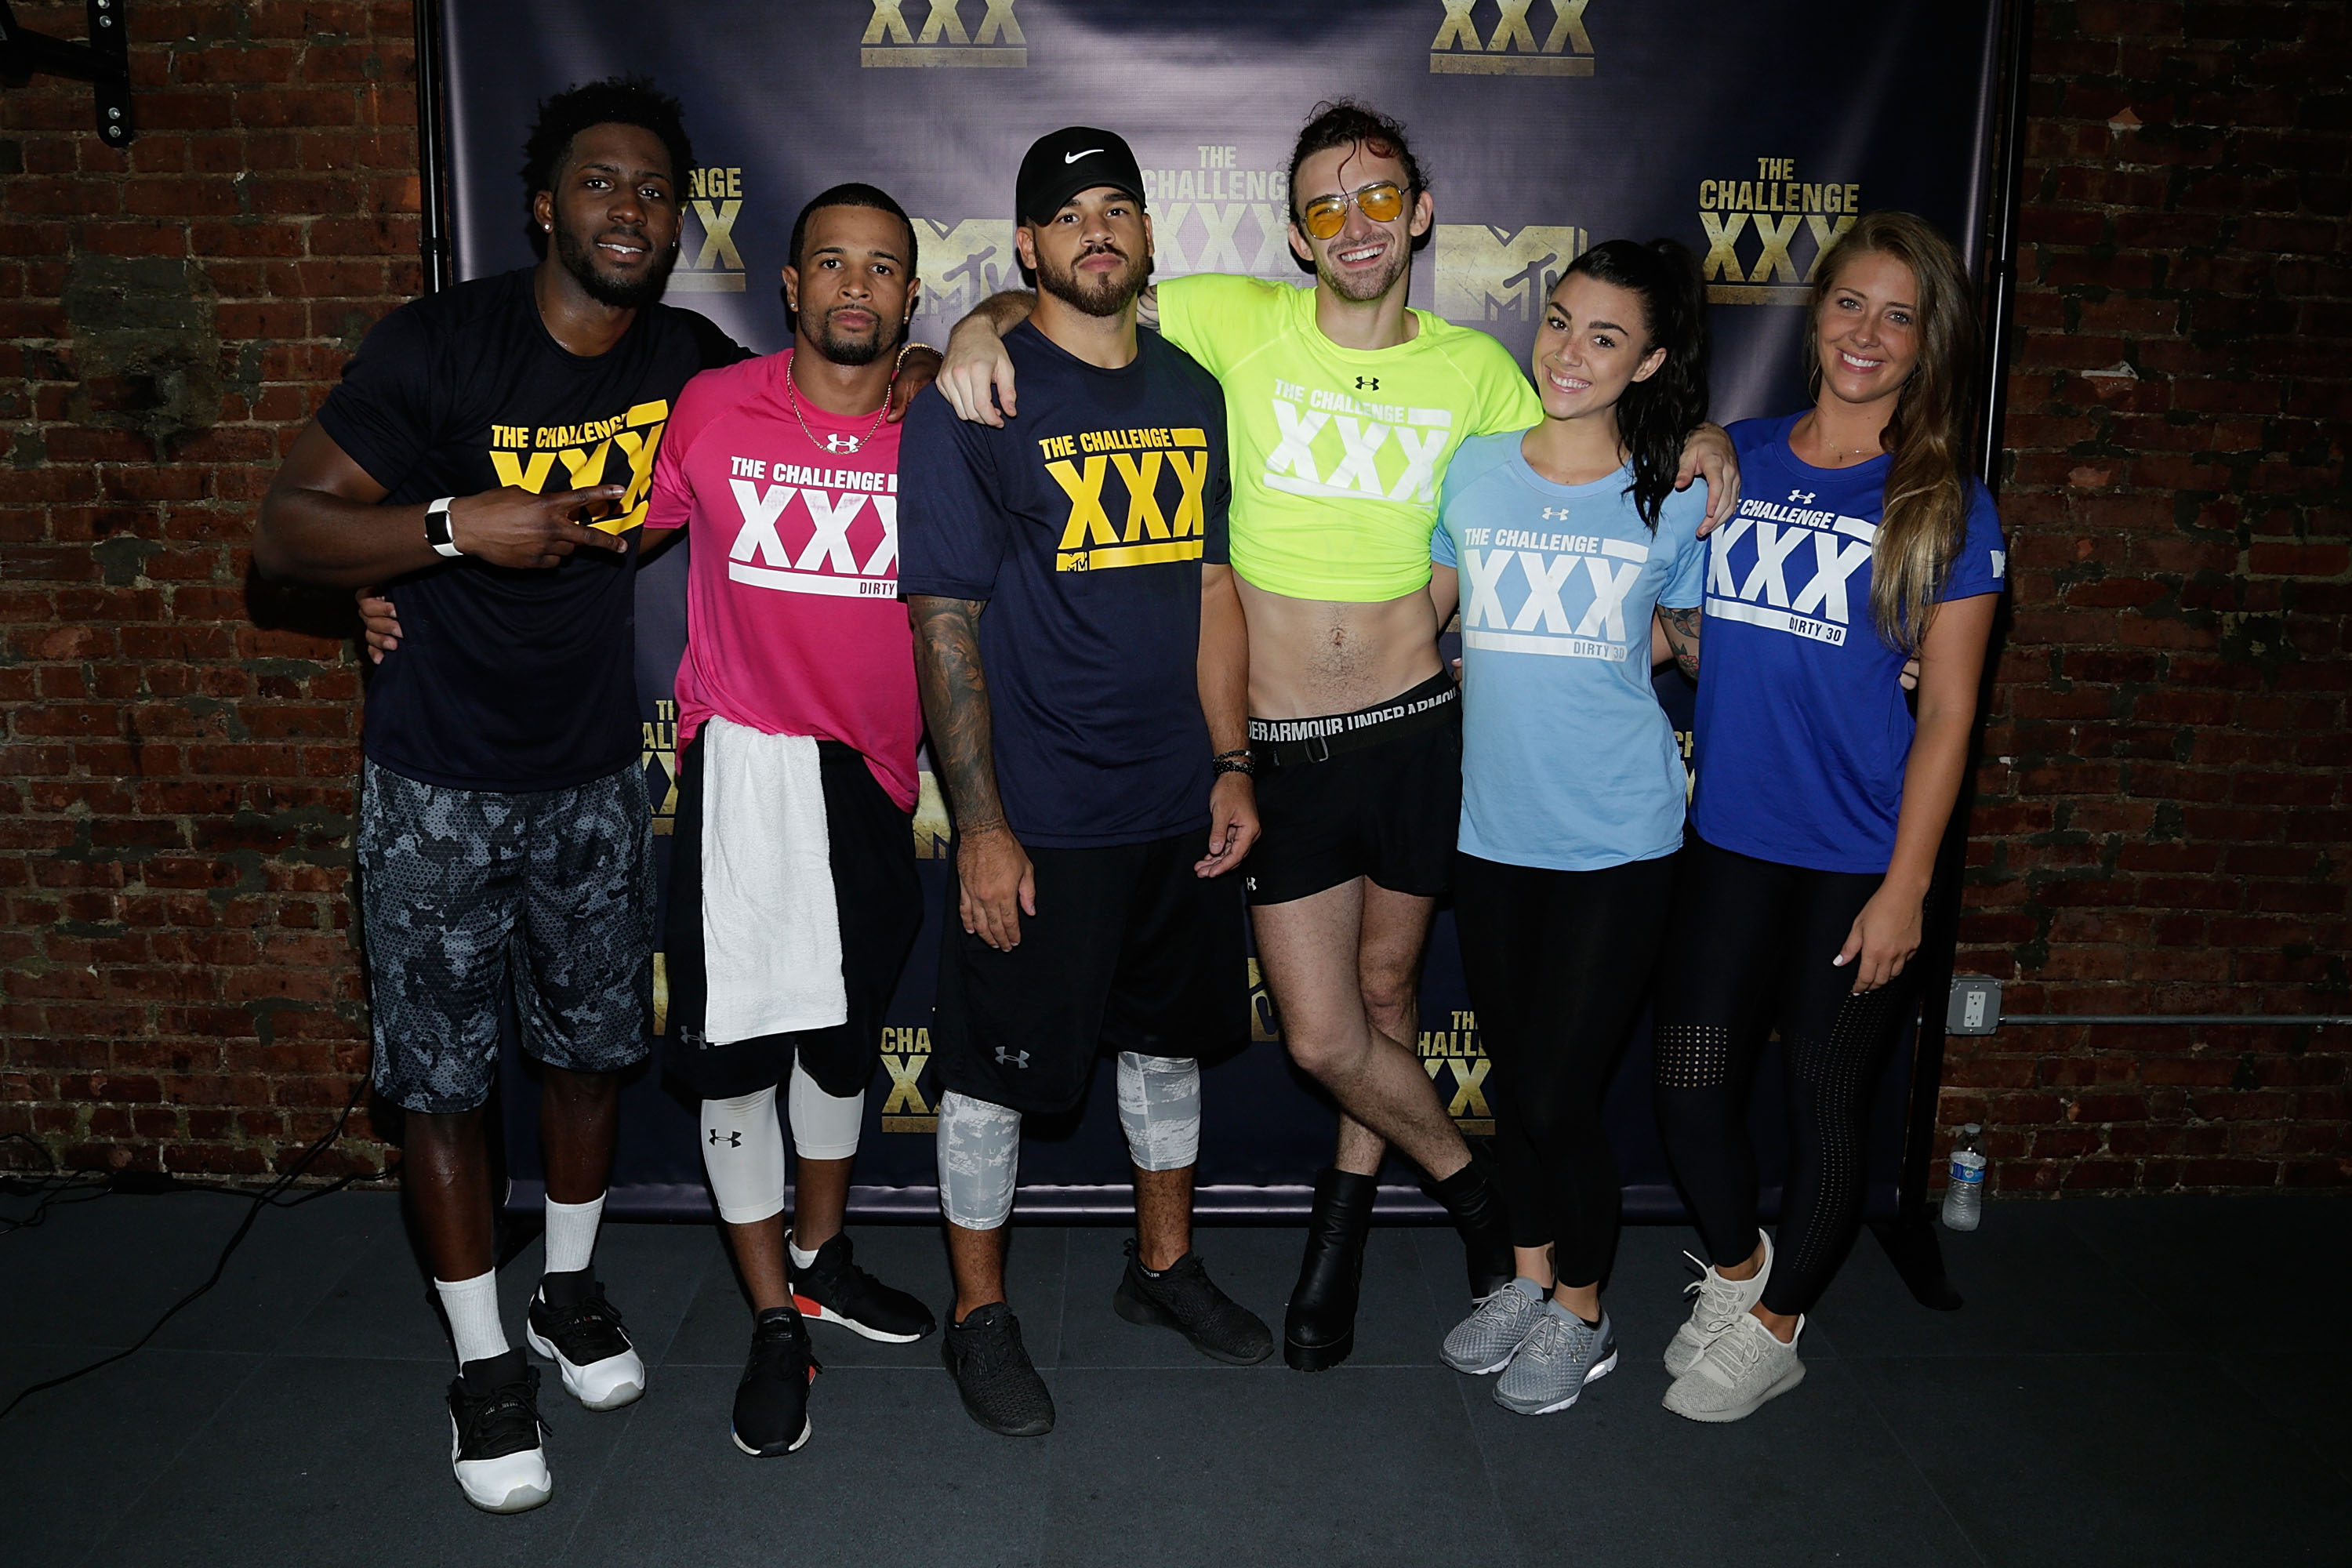 Derrick Henry, Nelson Thomas, Cory Wharton, Chris "Ammo" Hall, Kailah Casillas and Jenna Compono attend The Challenge XXX: Ultimate Fan Experience